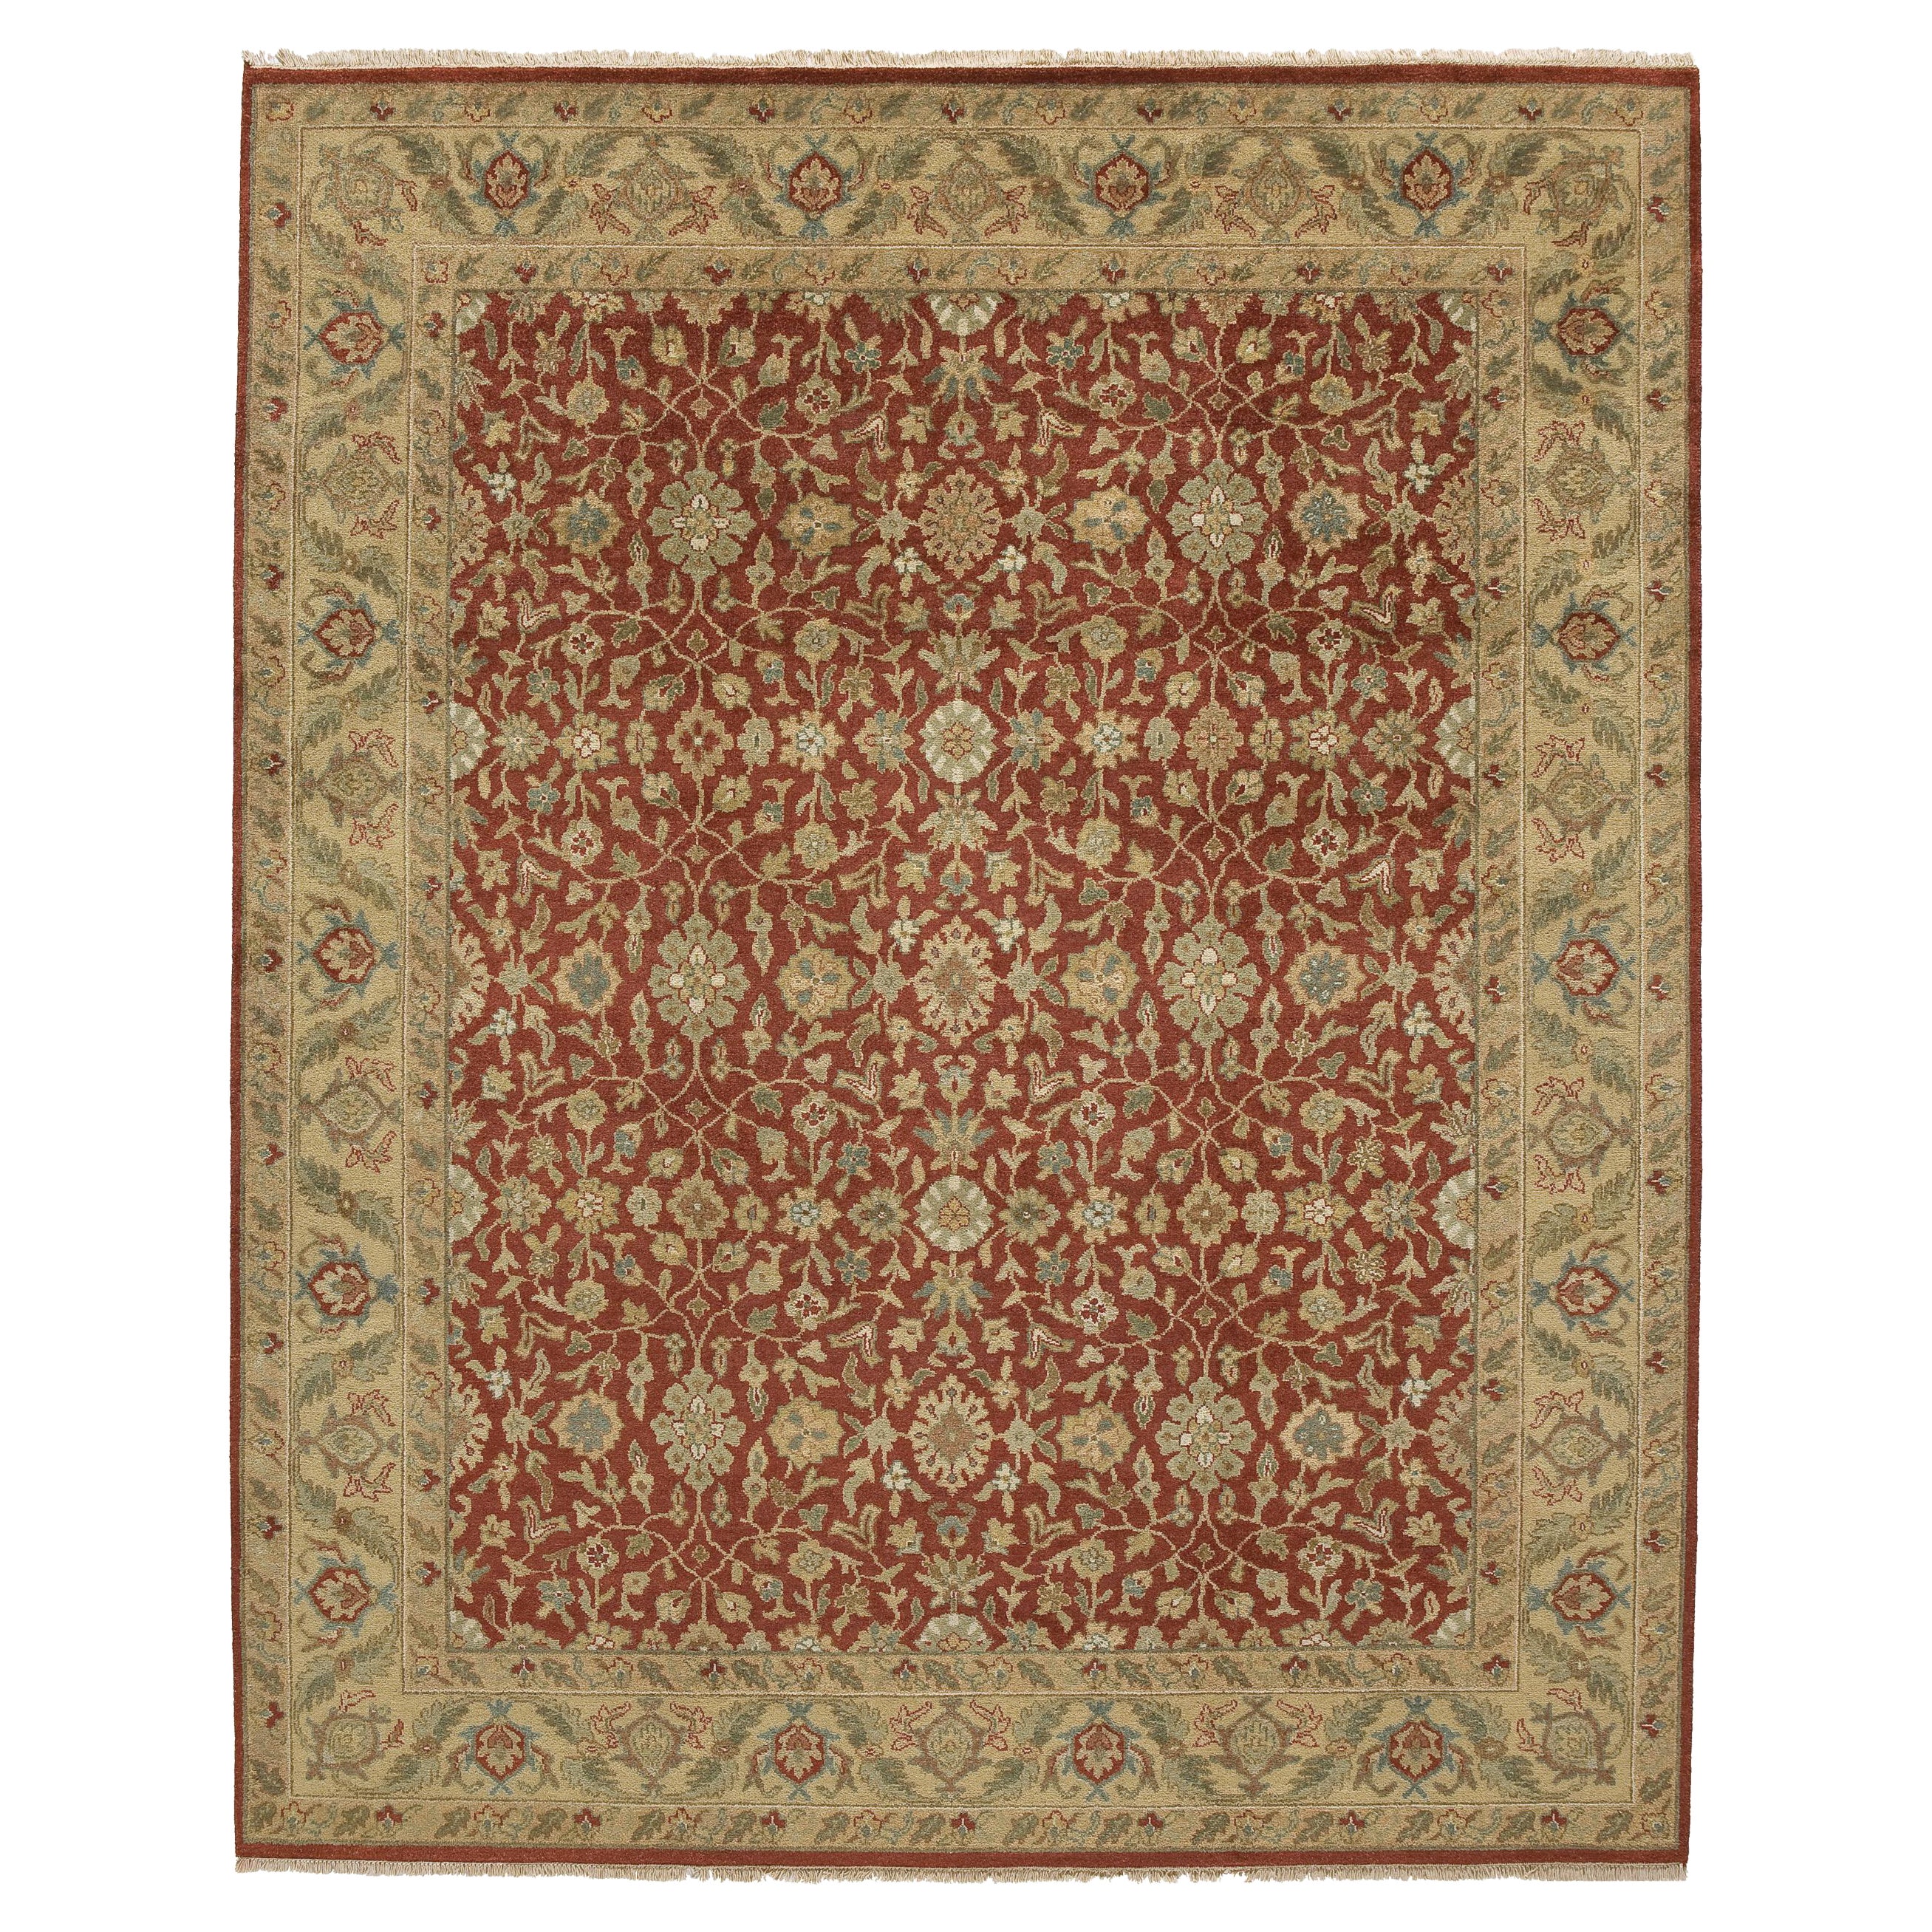 Luxury Traditional Hand-Knotted Yezd Red & Light Gold 12x22 Rug